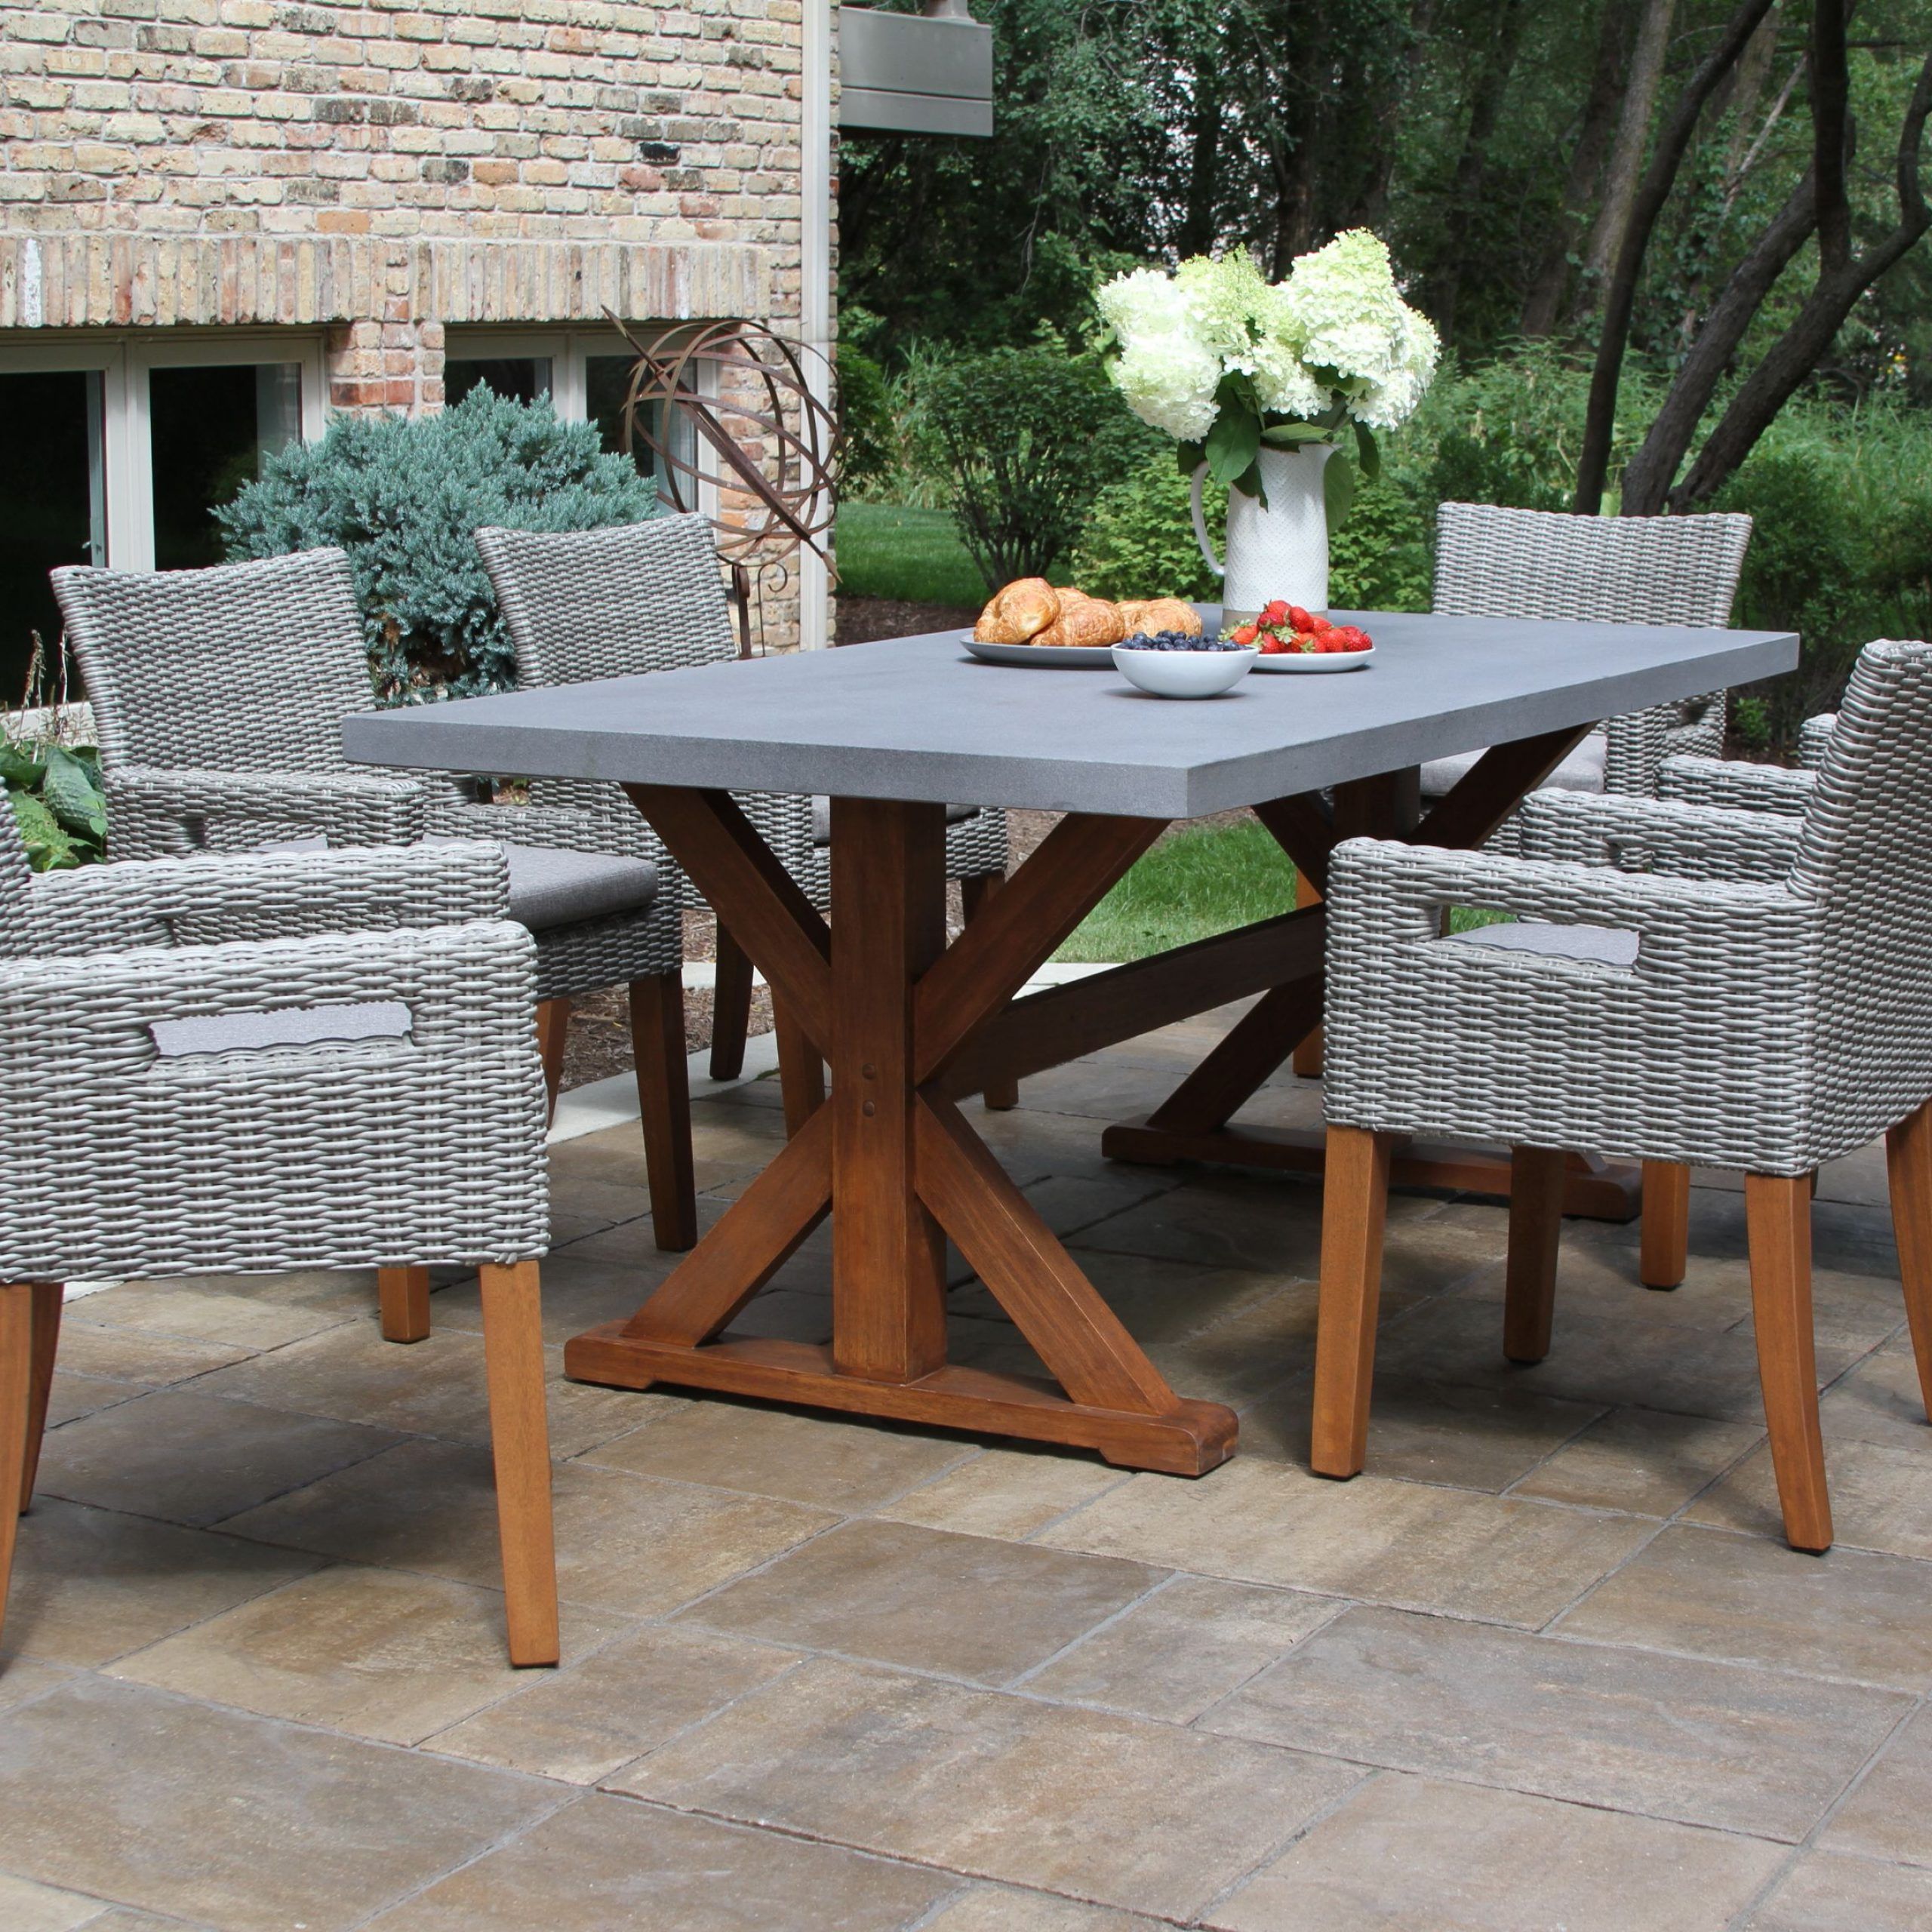 Round Teak And Eucalyptus Patio Dining Sets Intended For Trendy Dining Table Set For Backyard – Anna Furniture (View 6 of 15)